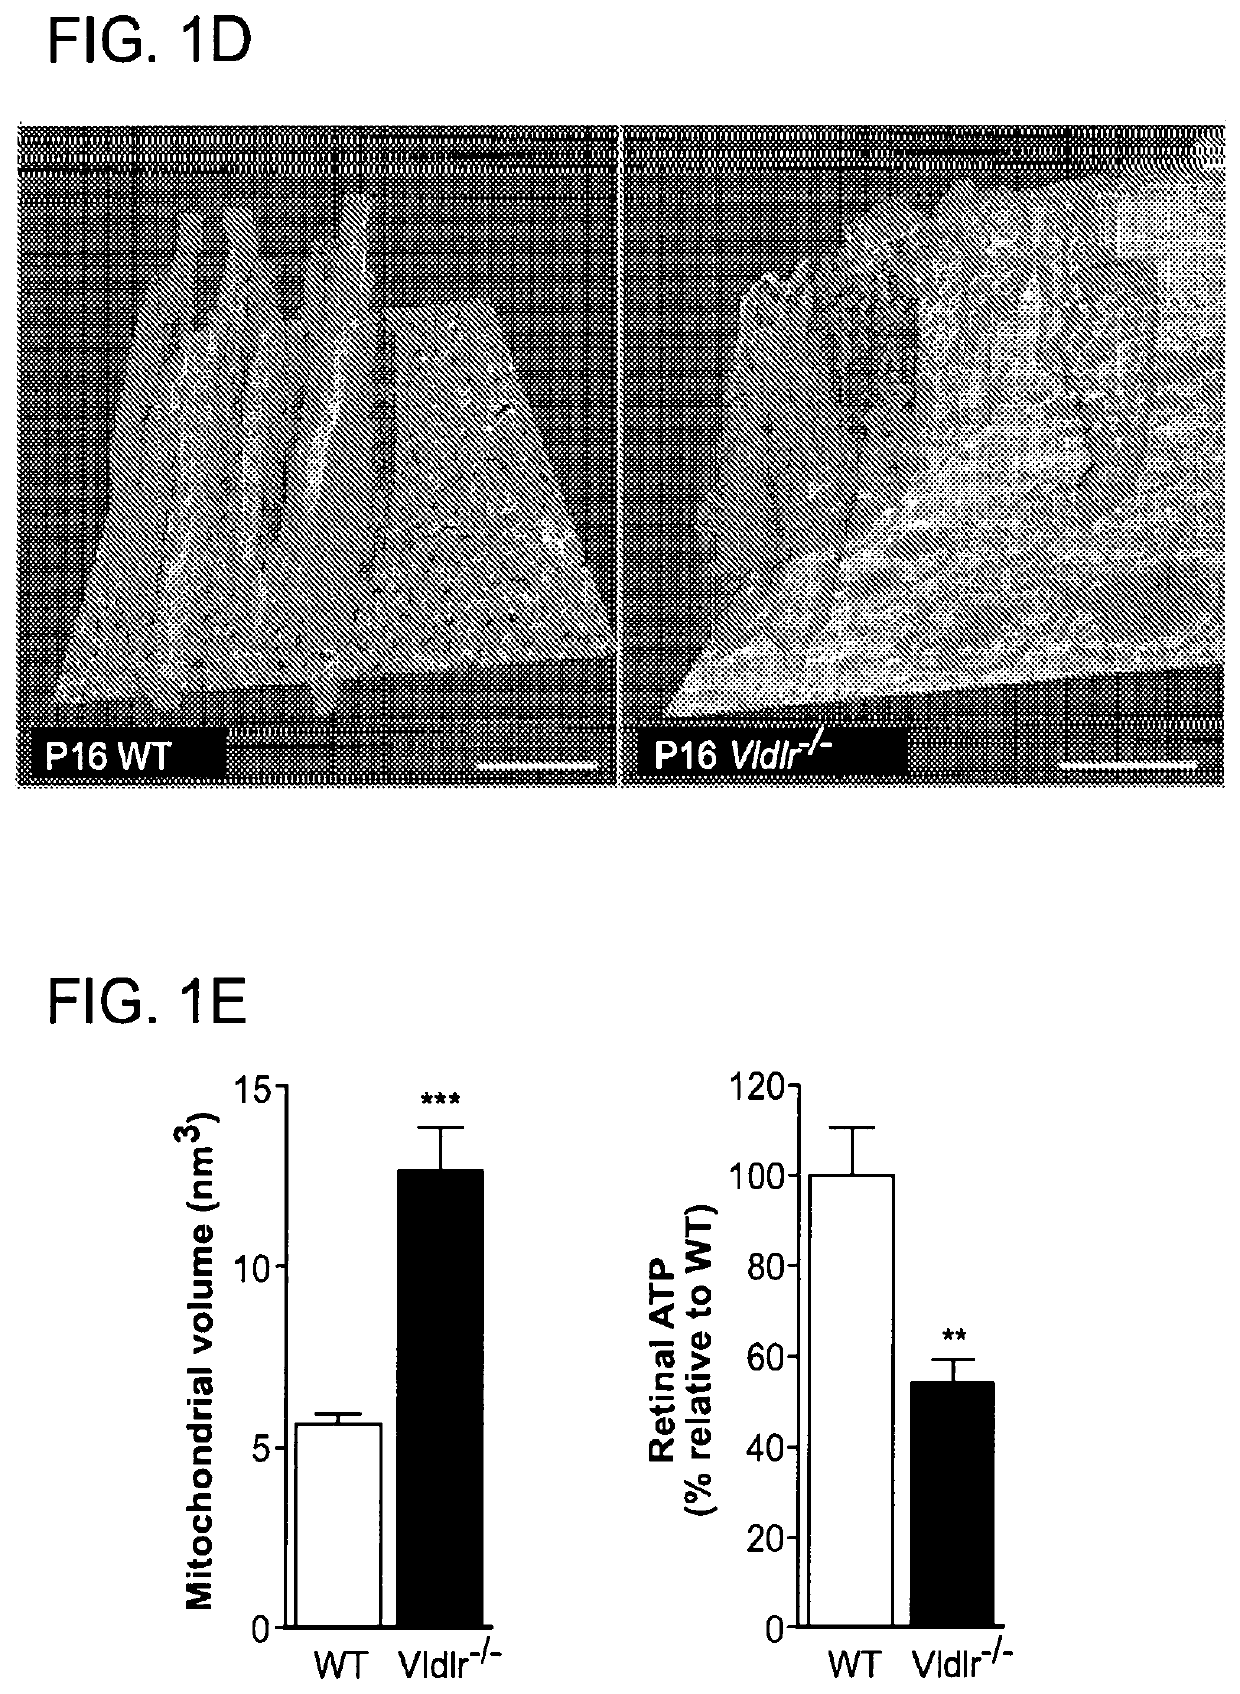 Ffa1 (GPR40) as a therapeutic target for neural angiogenesis diseases or disorders